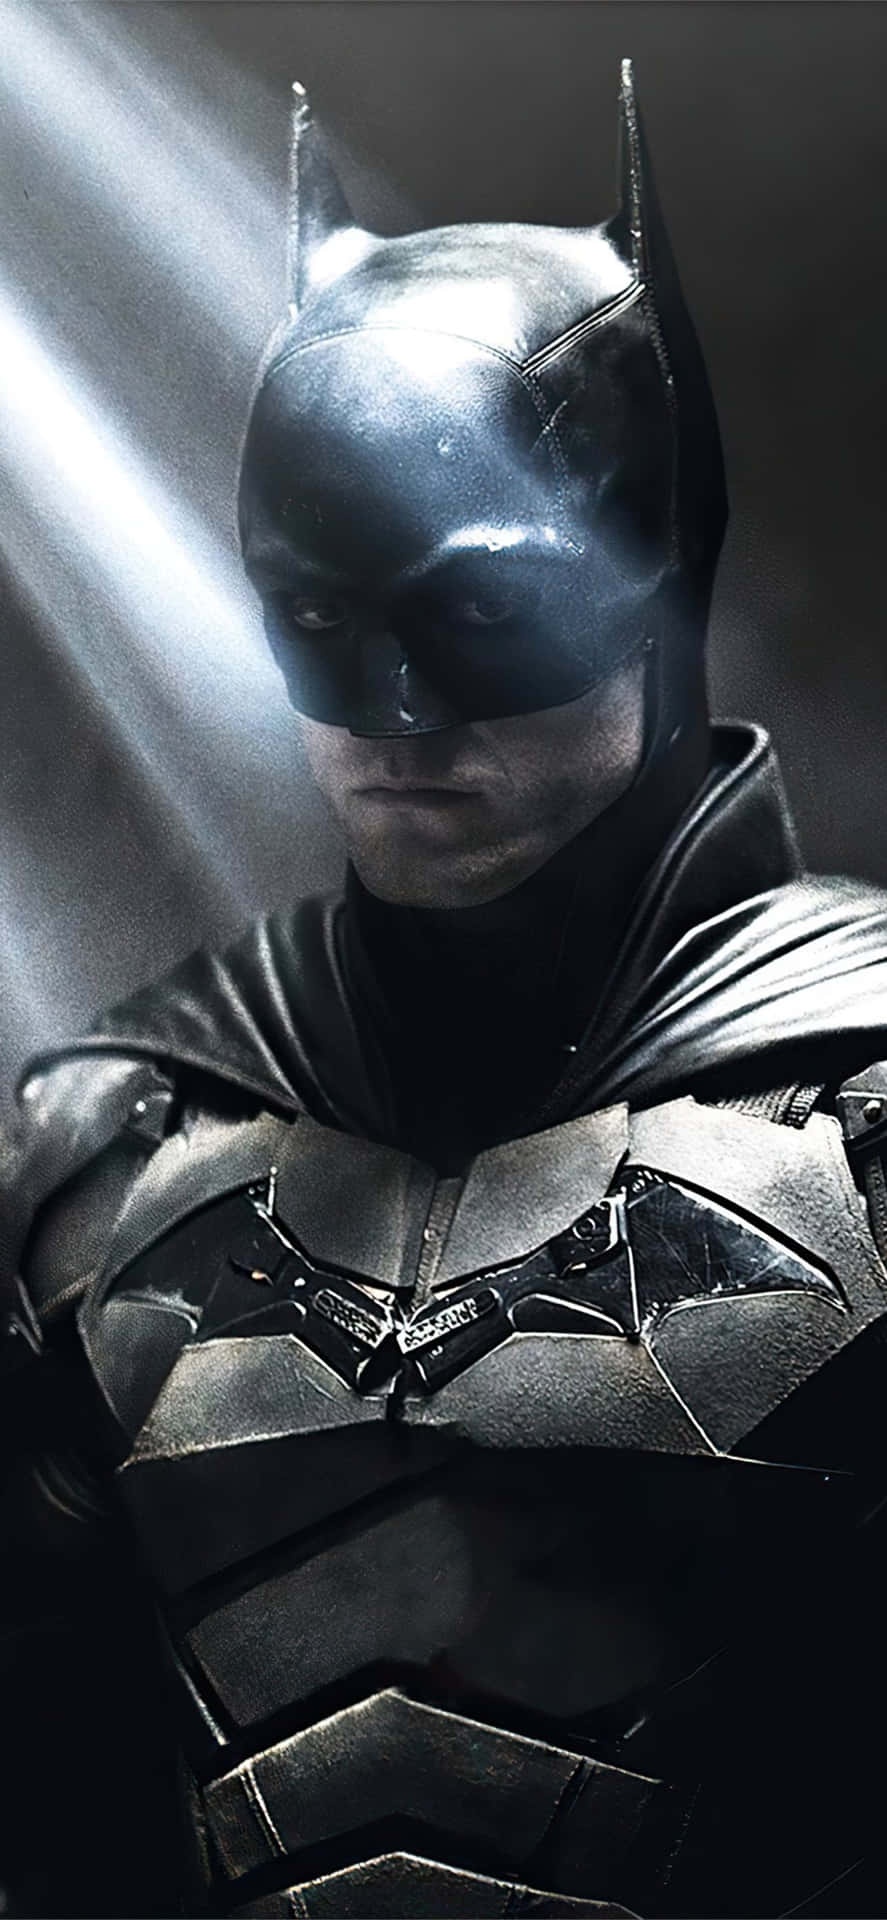 Show off your dark side with the Awesome Batman Iphone Wallpaper